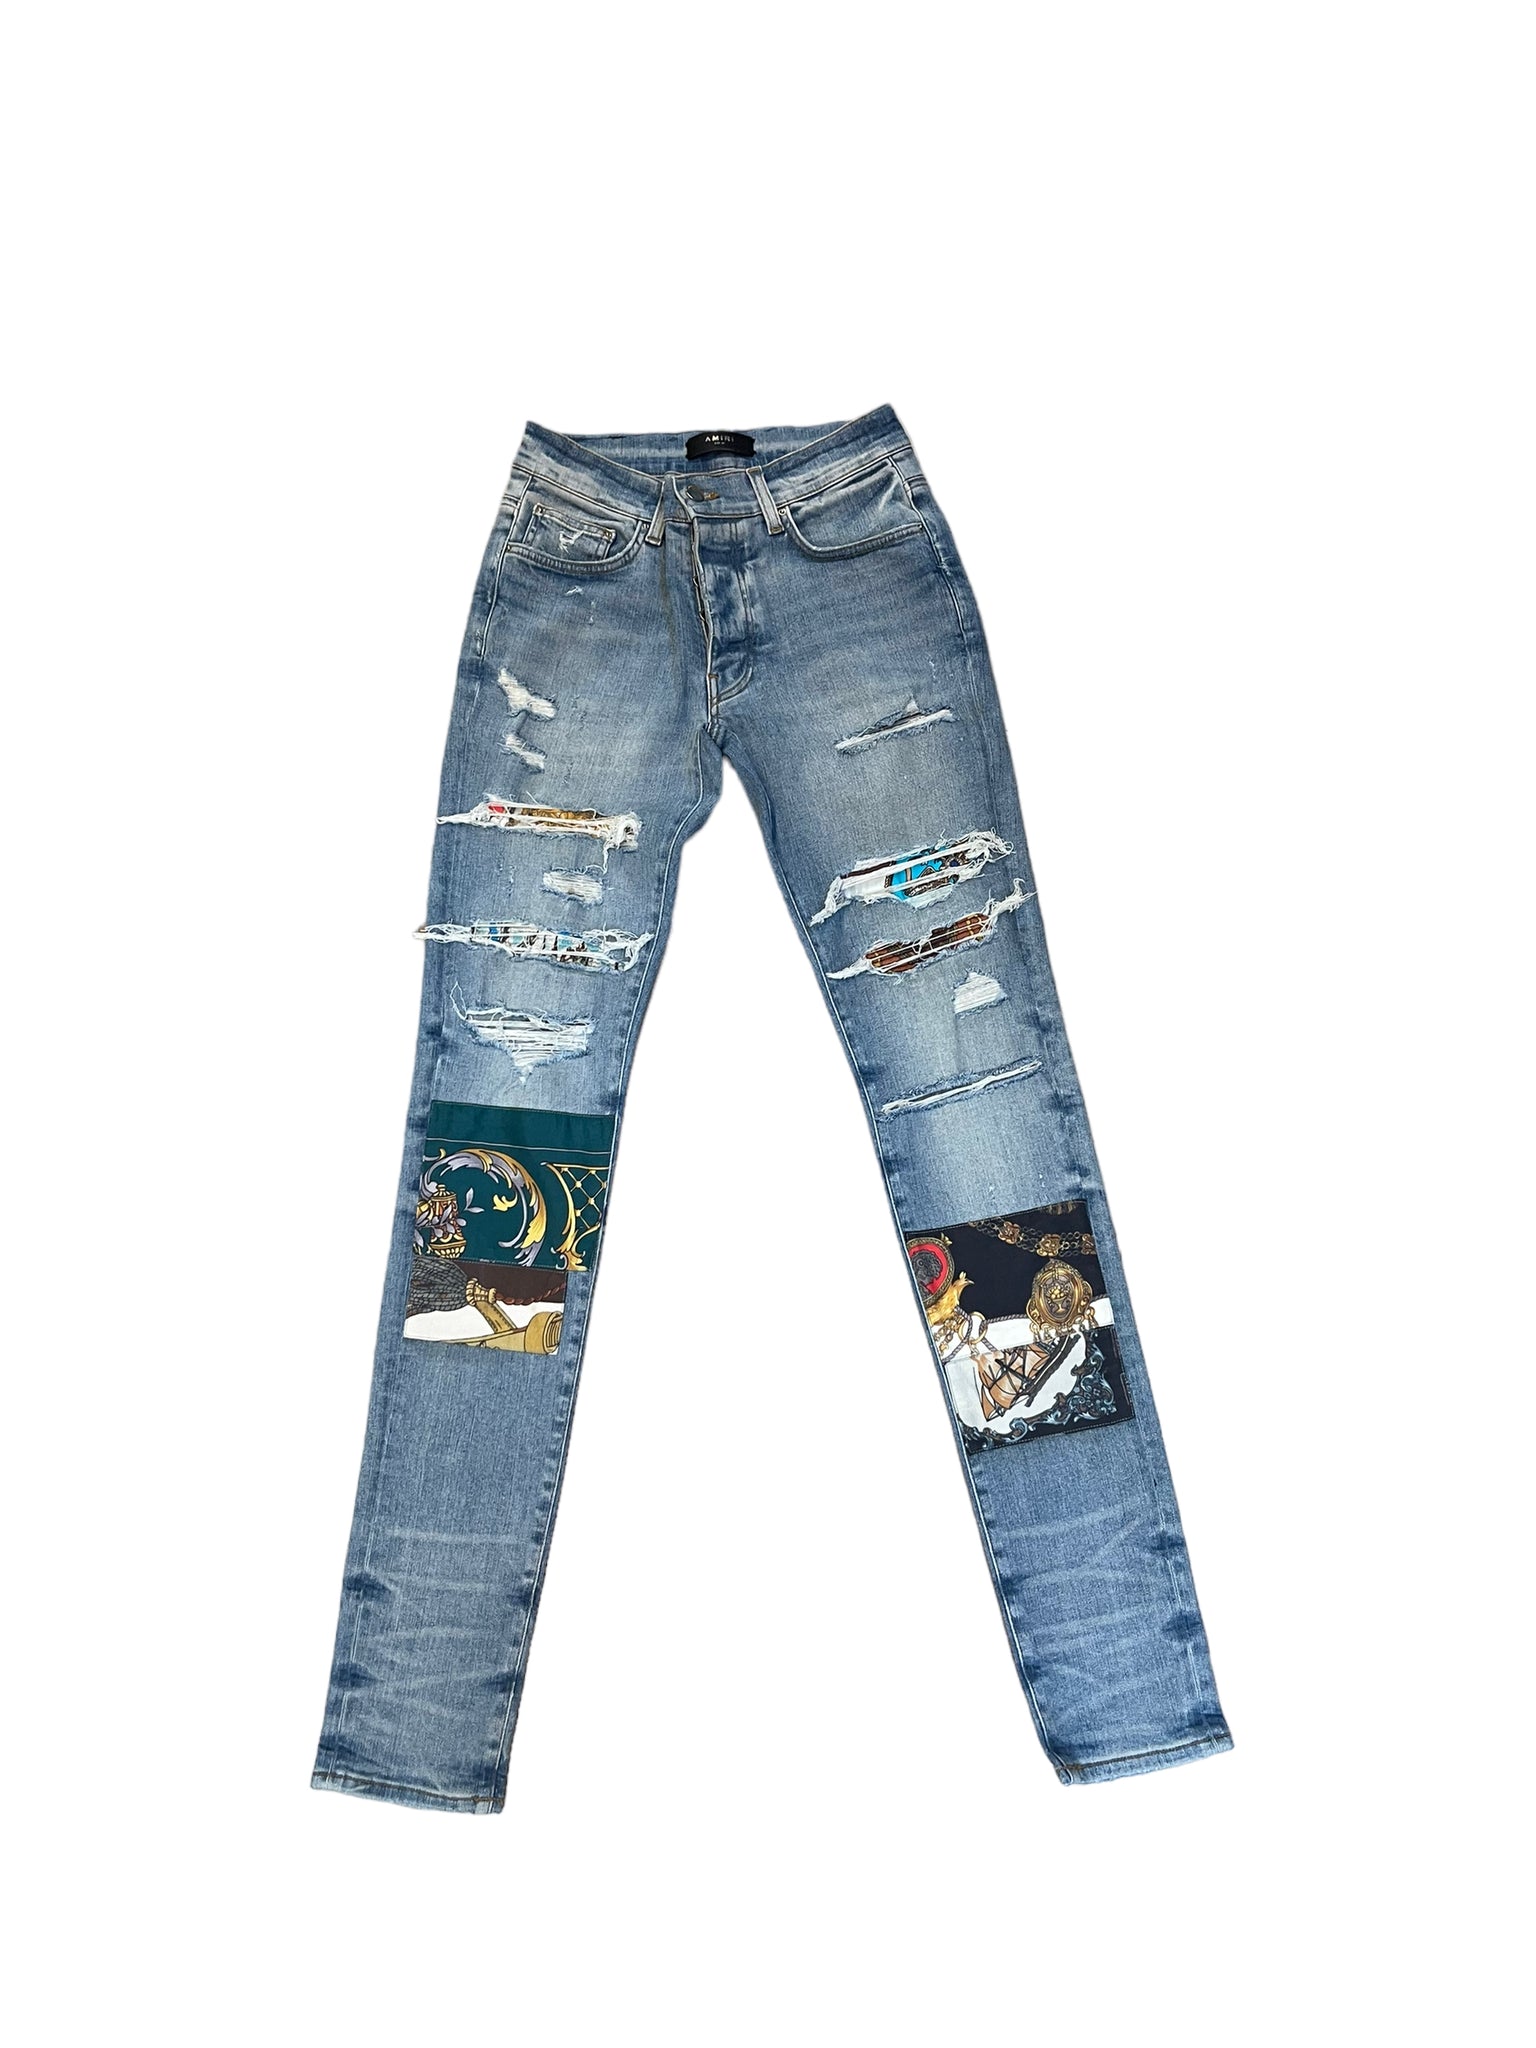 Amiri Jeans "Pirate Patch" (Pre-Owned)